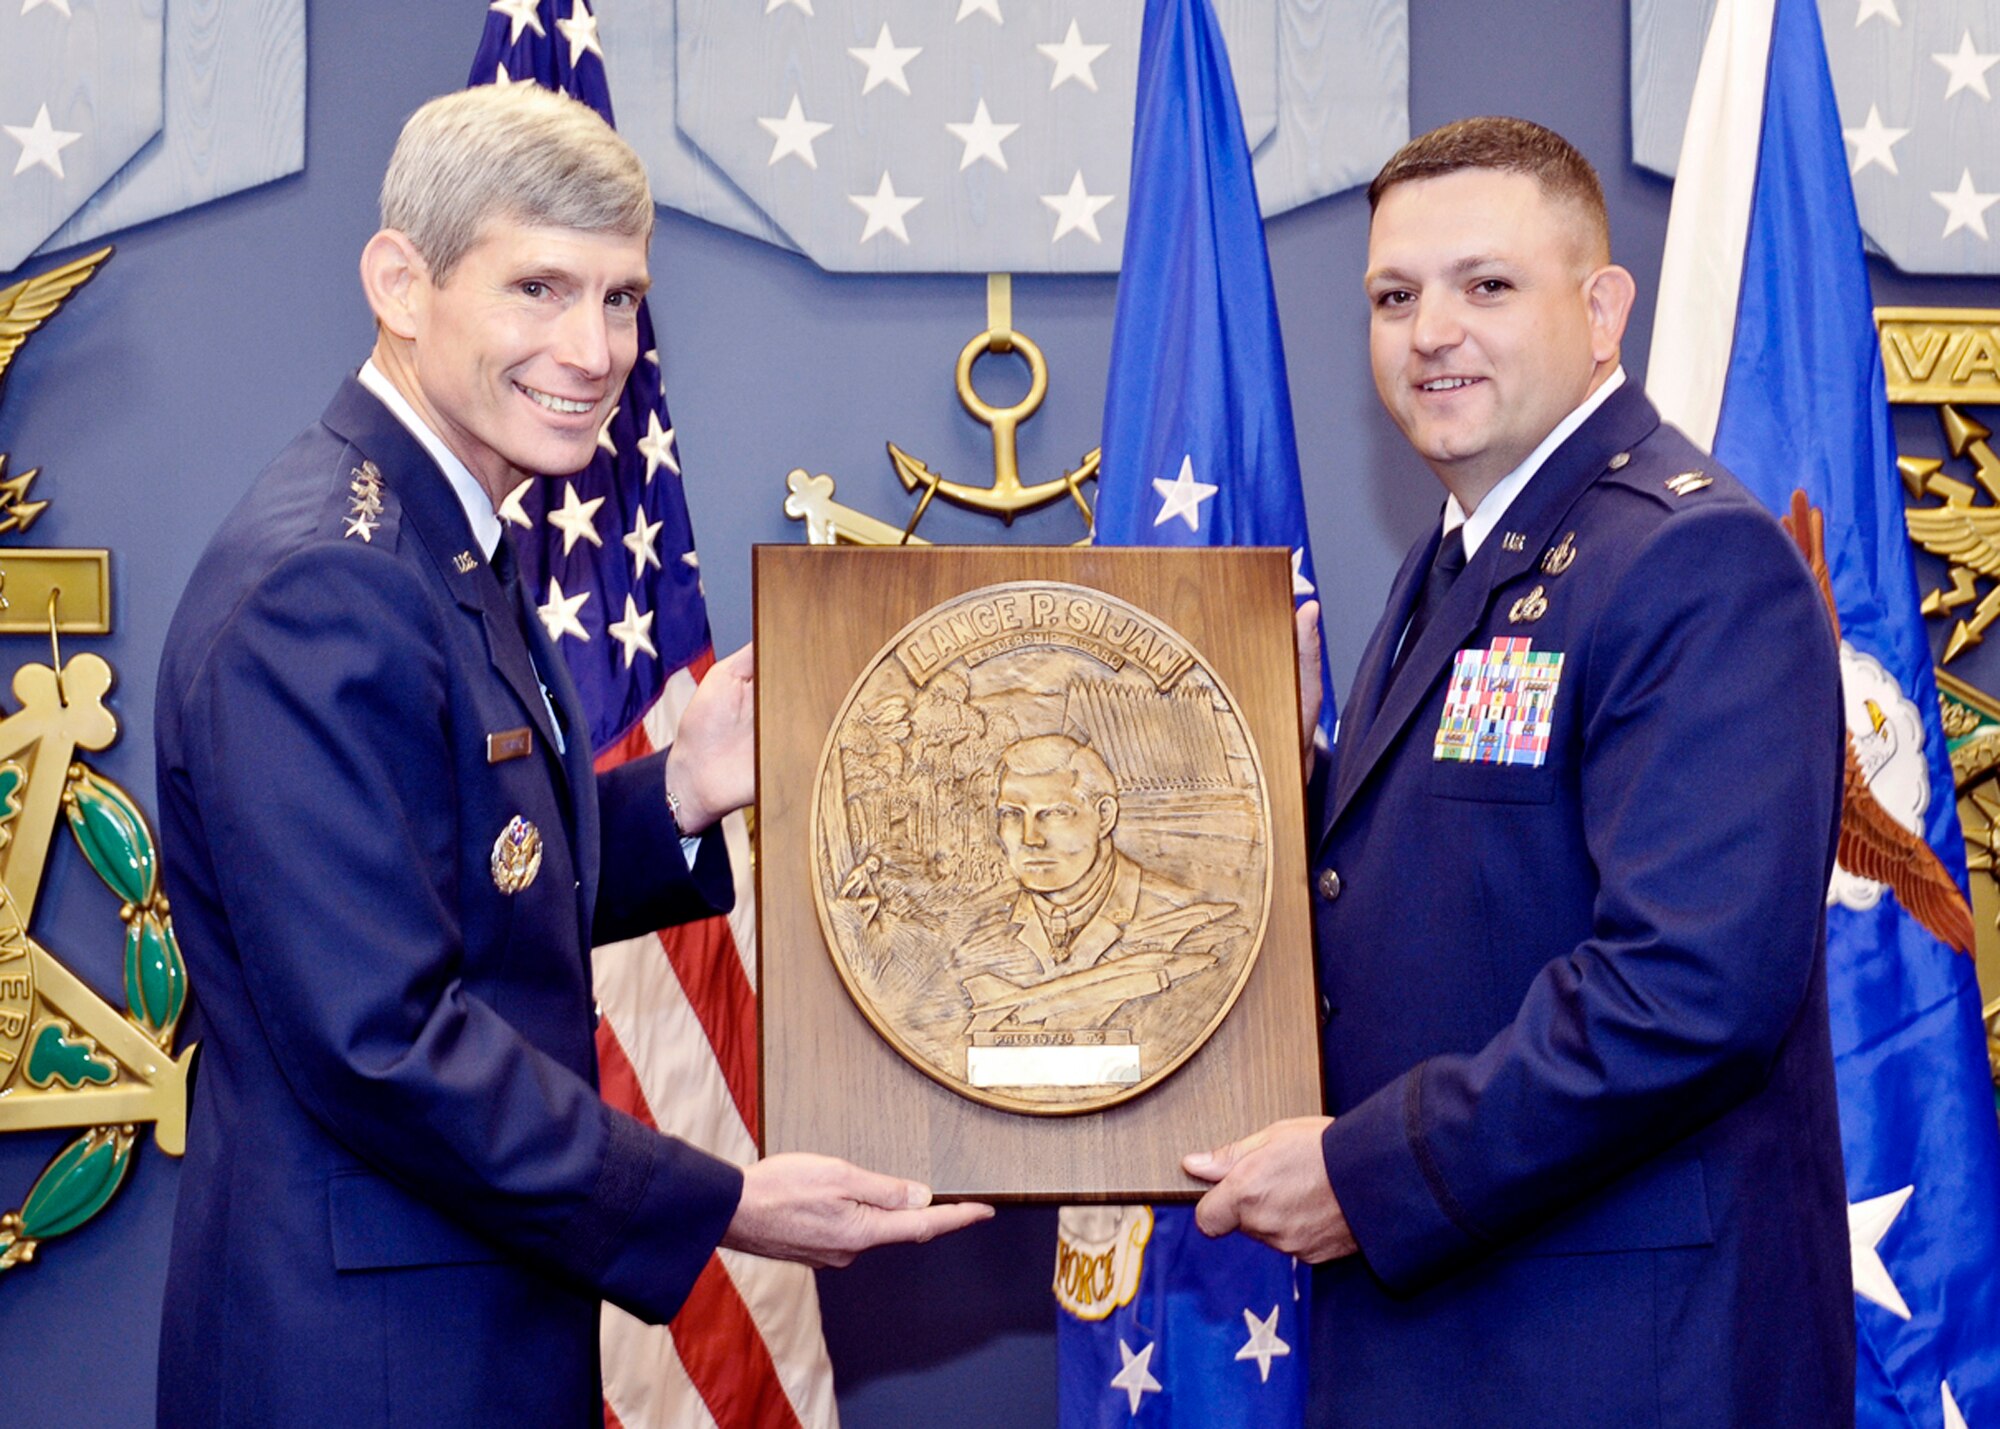 Air Force Chief of Staff Gen. Norton Schwartz presents the Capt. Lance P Sijan Air Force Leadership Award to Capt. Thomas Eckel Nov. 18, 2009.  The Sijan Award recognizes the accomplishments of officer and enlisted Airmen who have demonstrated the highest qualities of leadership in the performance of their duties and the conduct of their lives. (U.S. Air Force photo/Michael J Pausic)